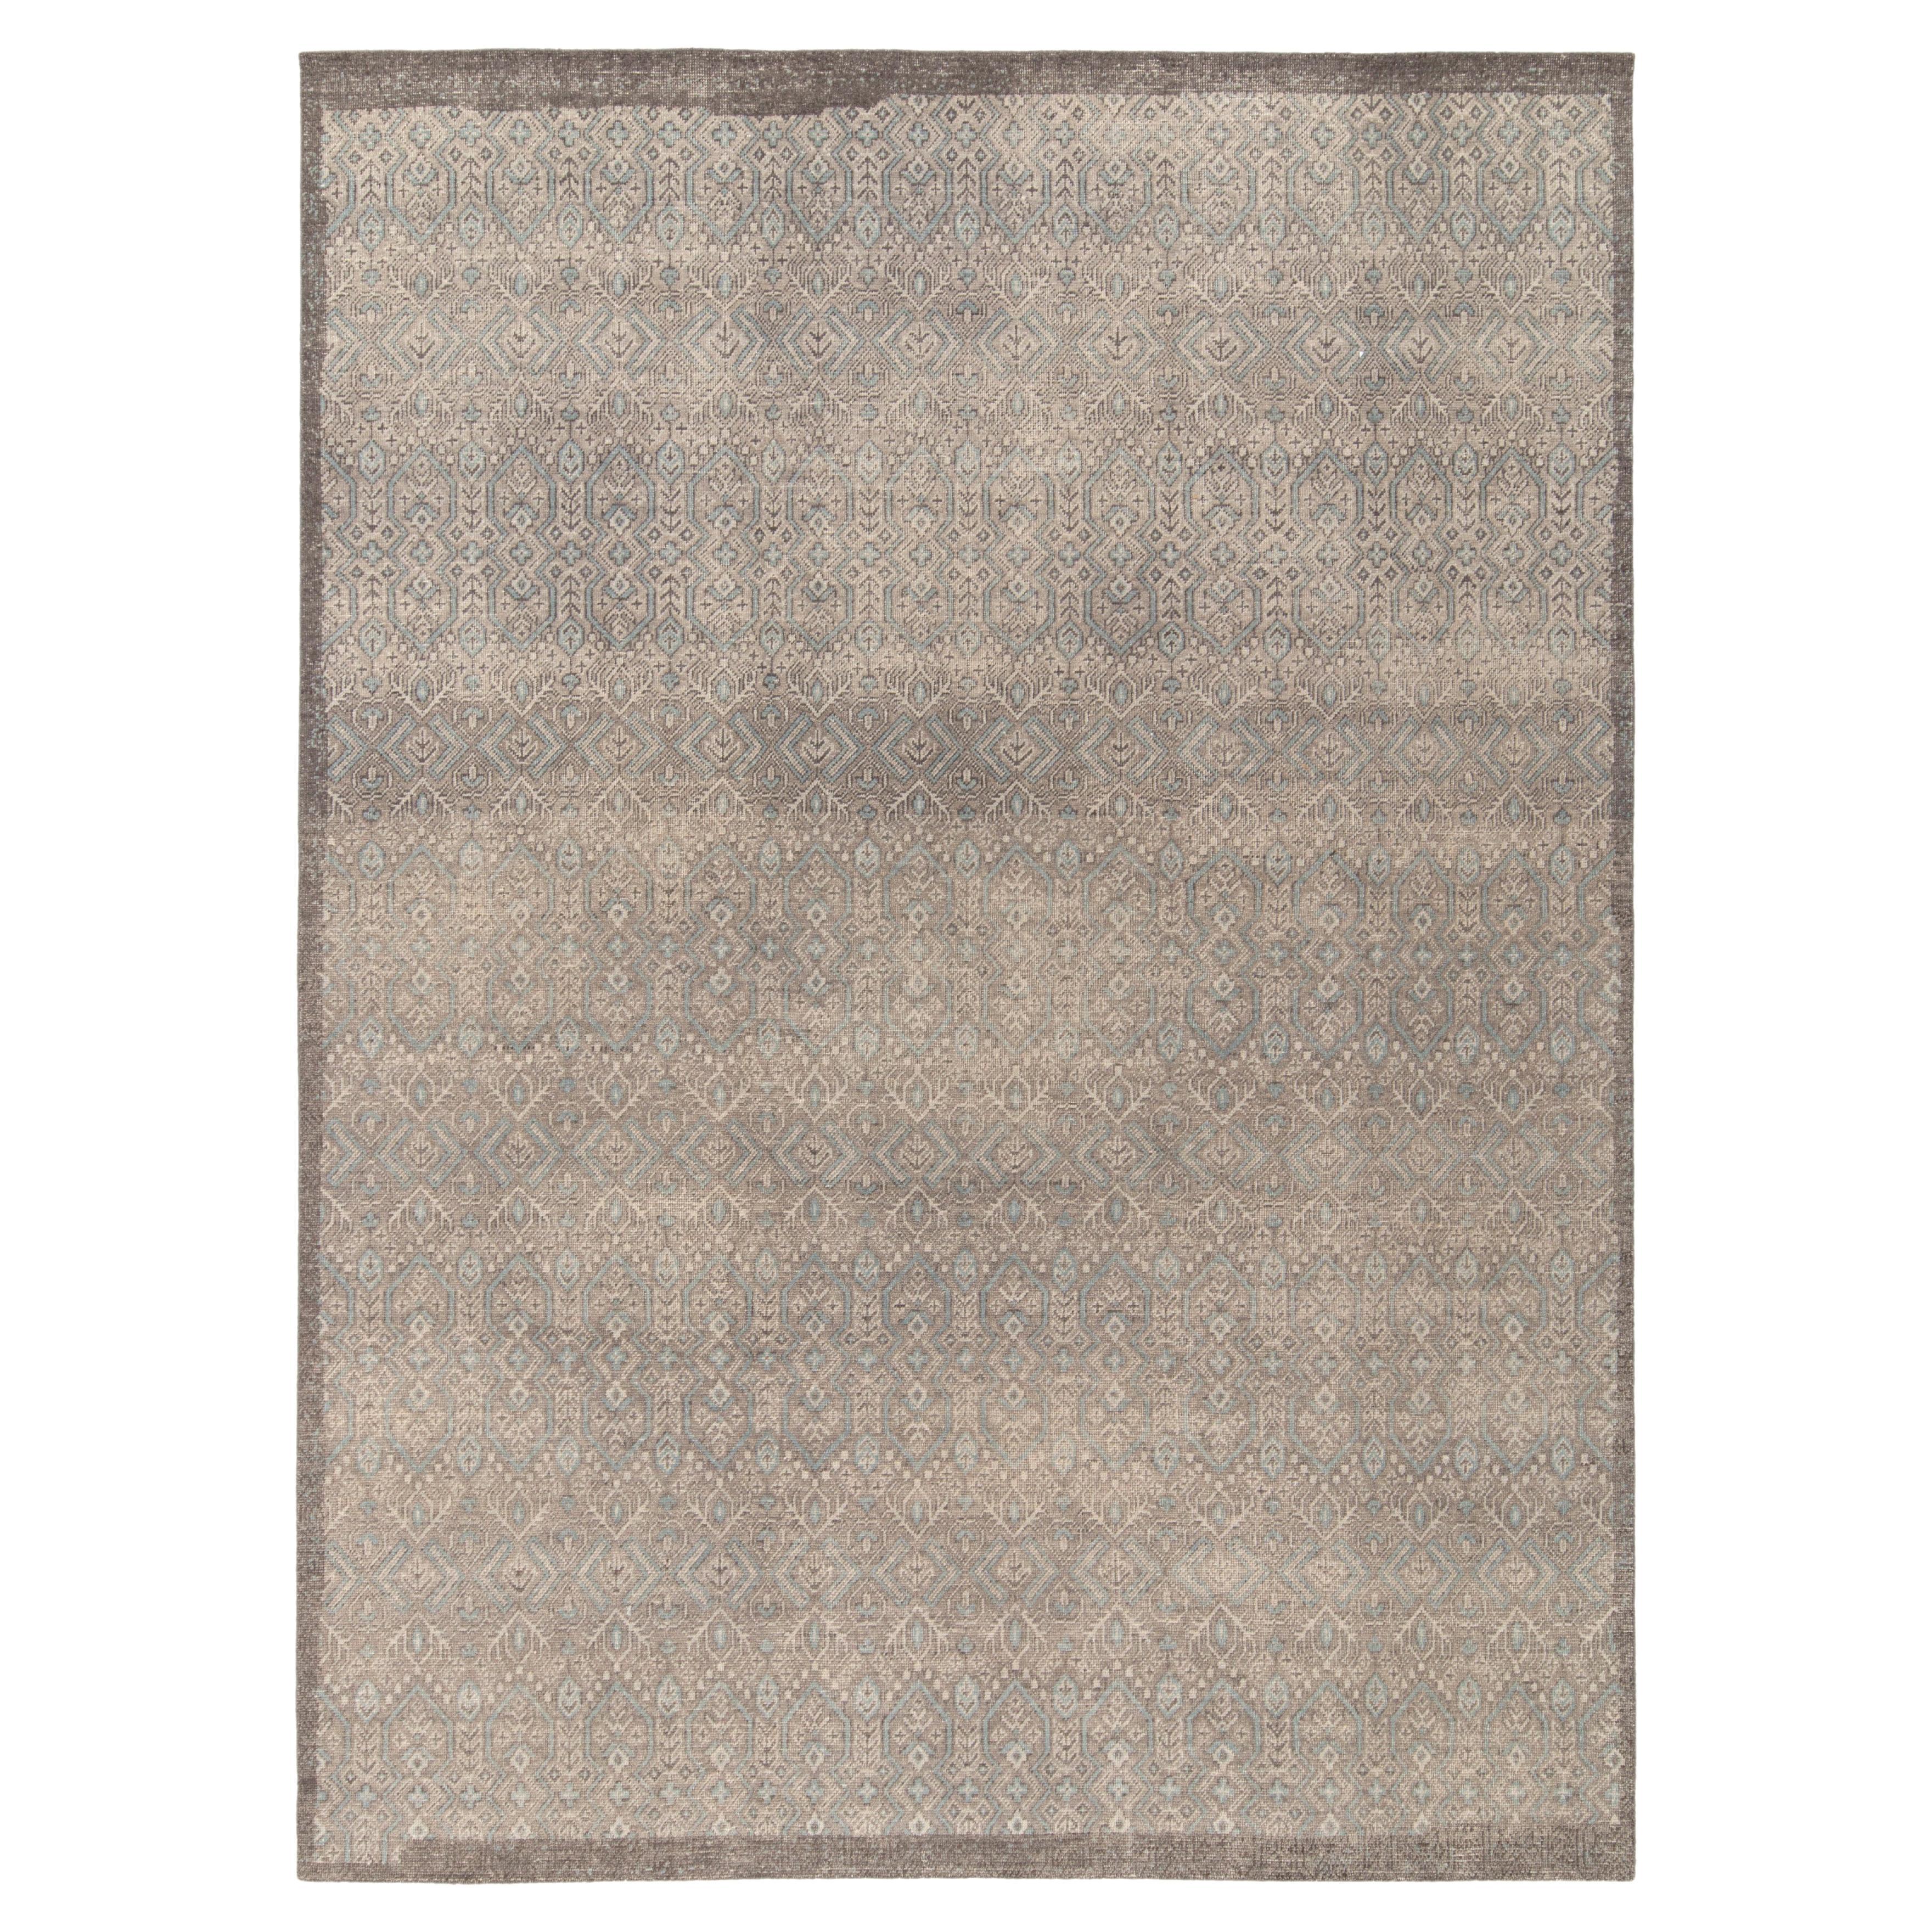 Rug & Kilim's Hand-Knotted Distressed Style Rug, Gray, Blue Geometric Pattern